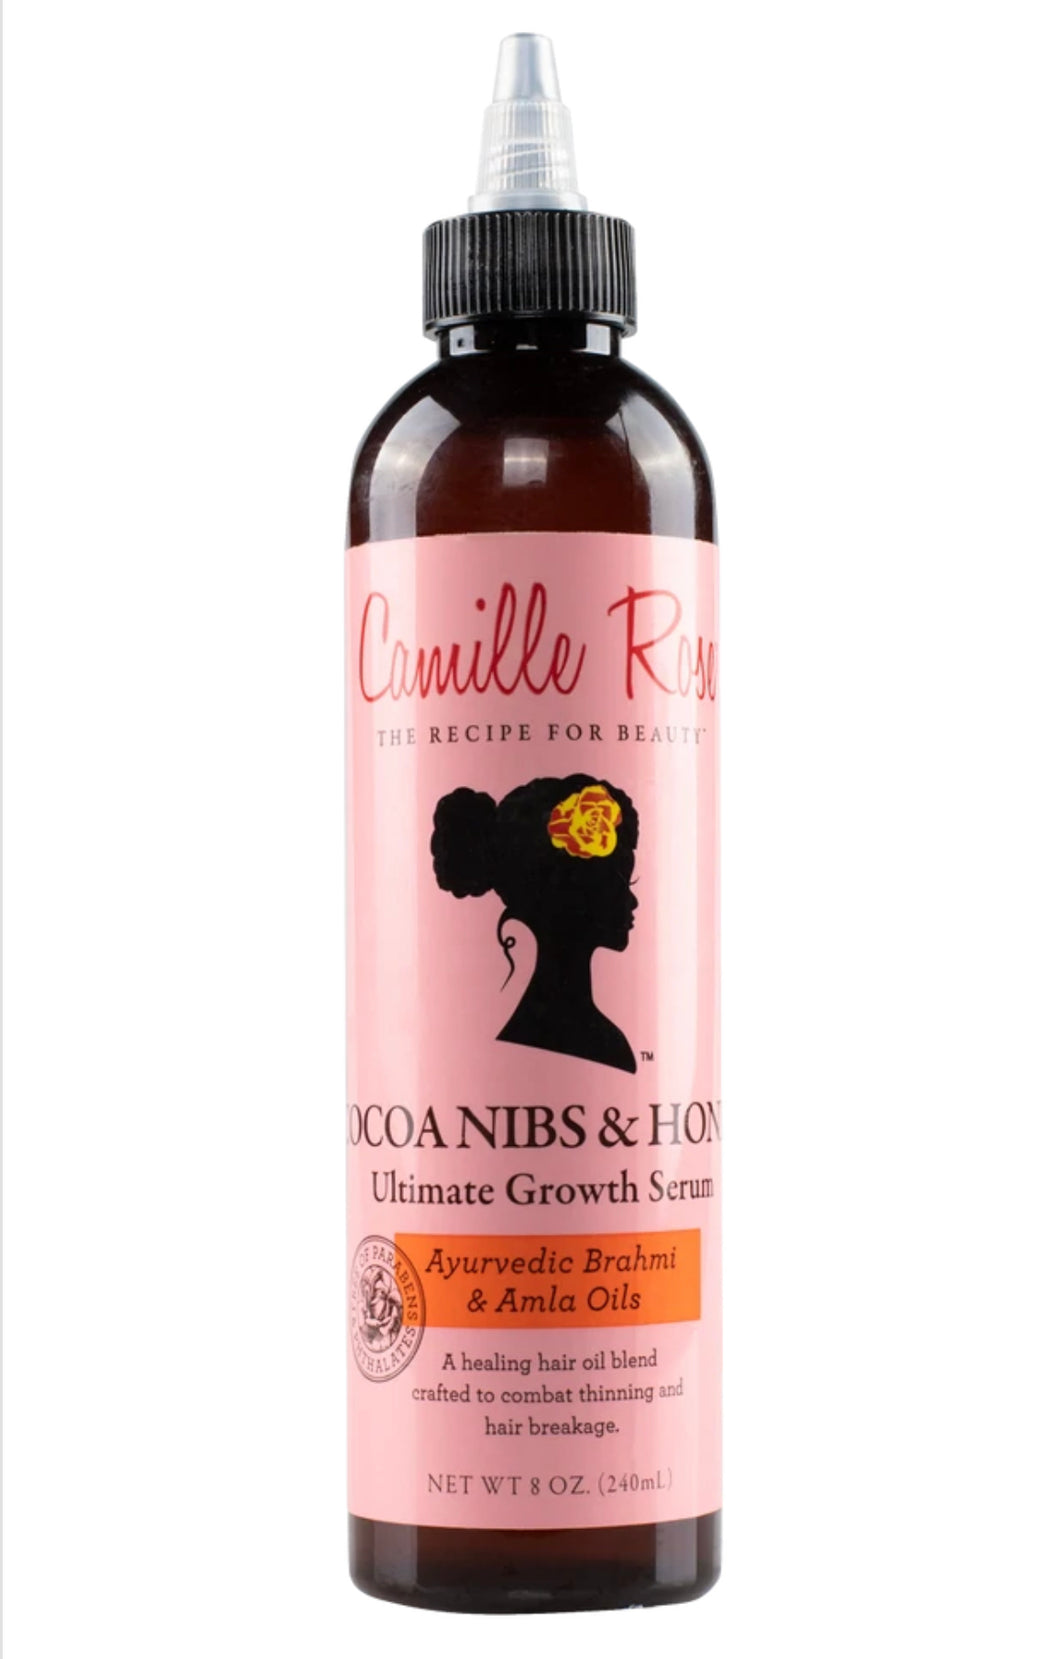 Camille Rose Cocoa Nibs & Honey Ultimate Growth Serum 8 oz.